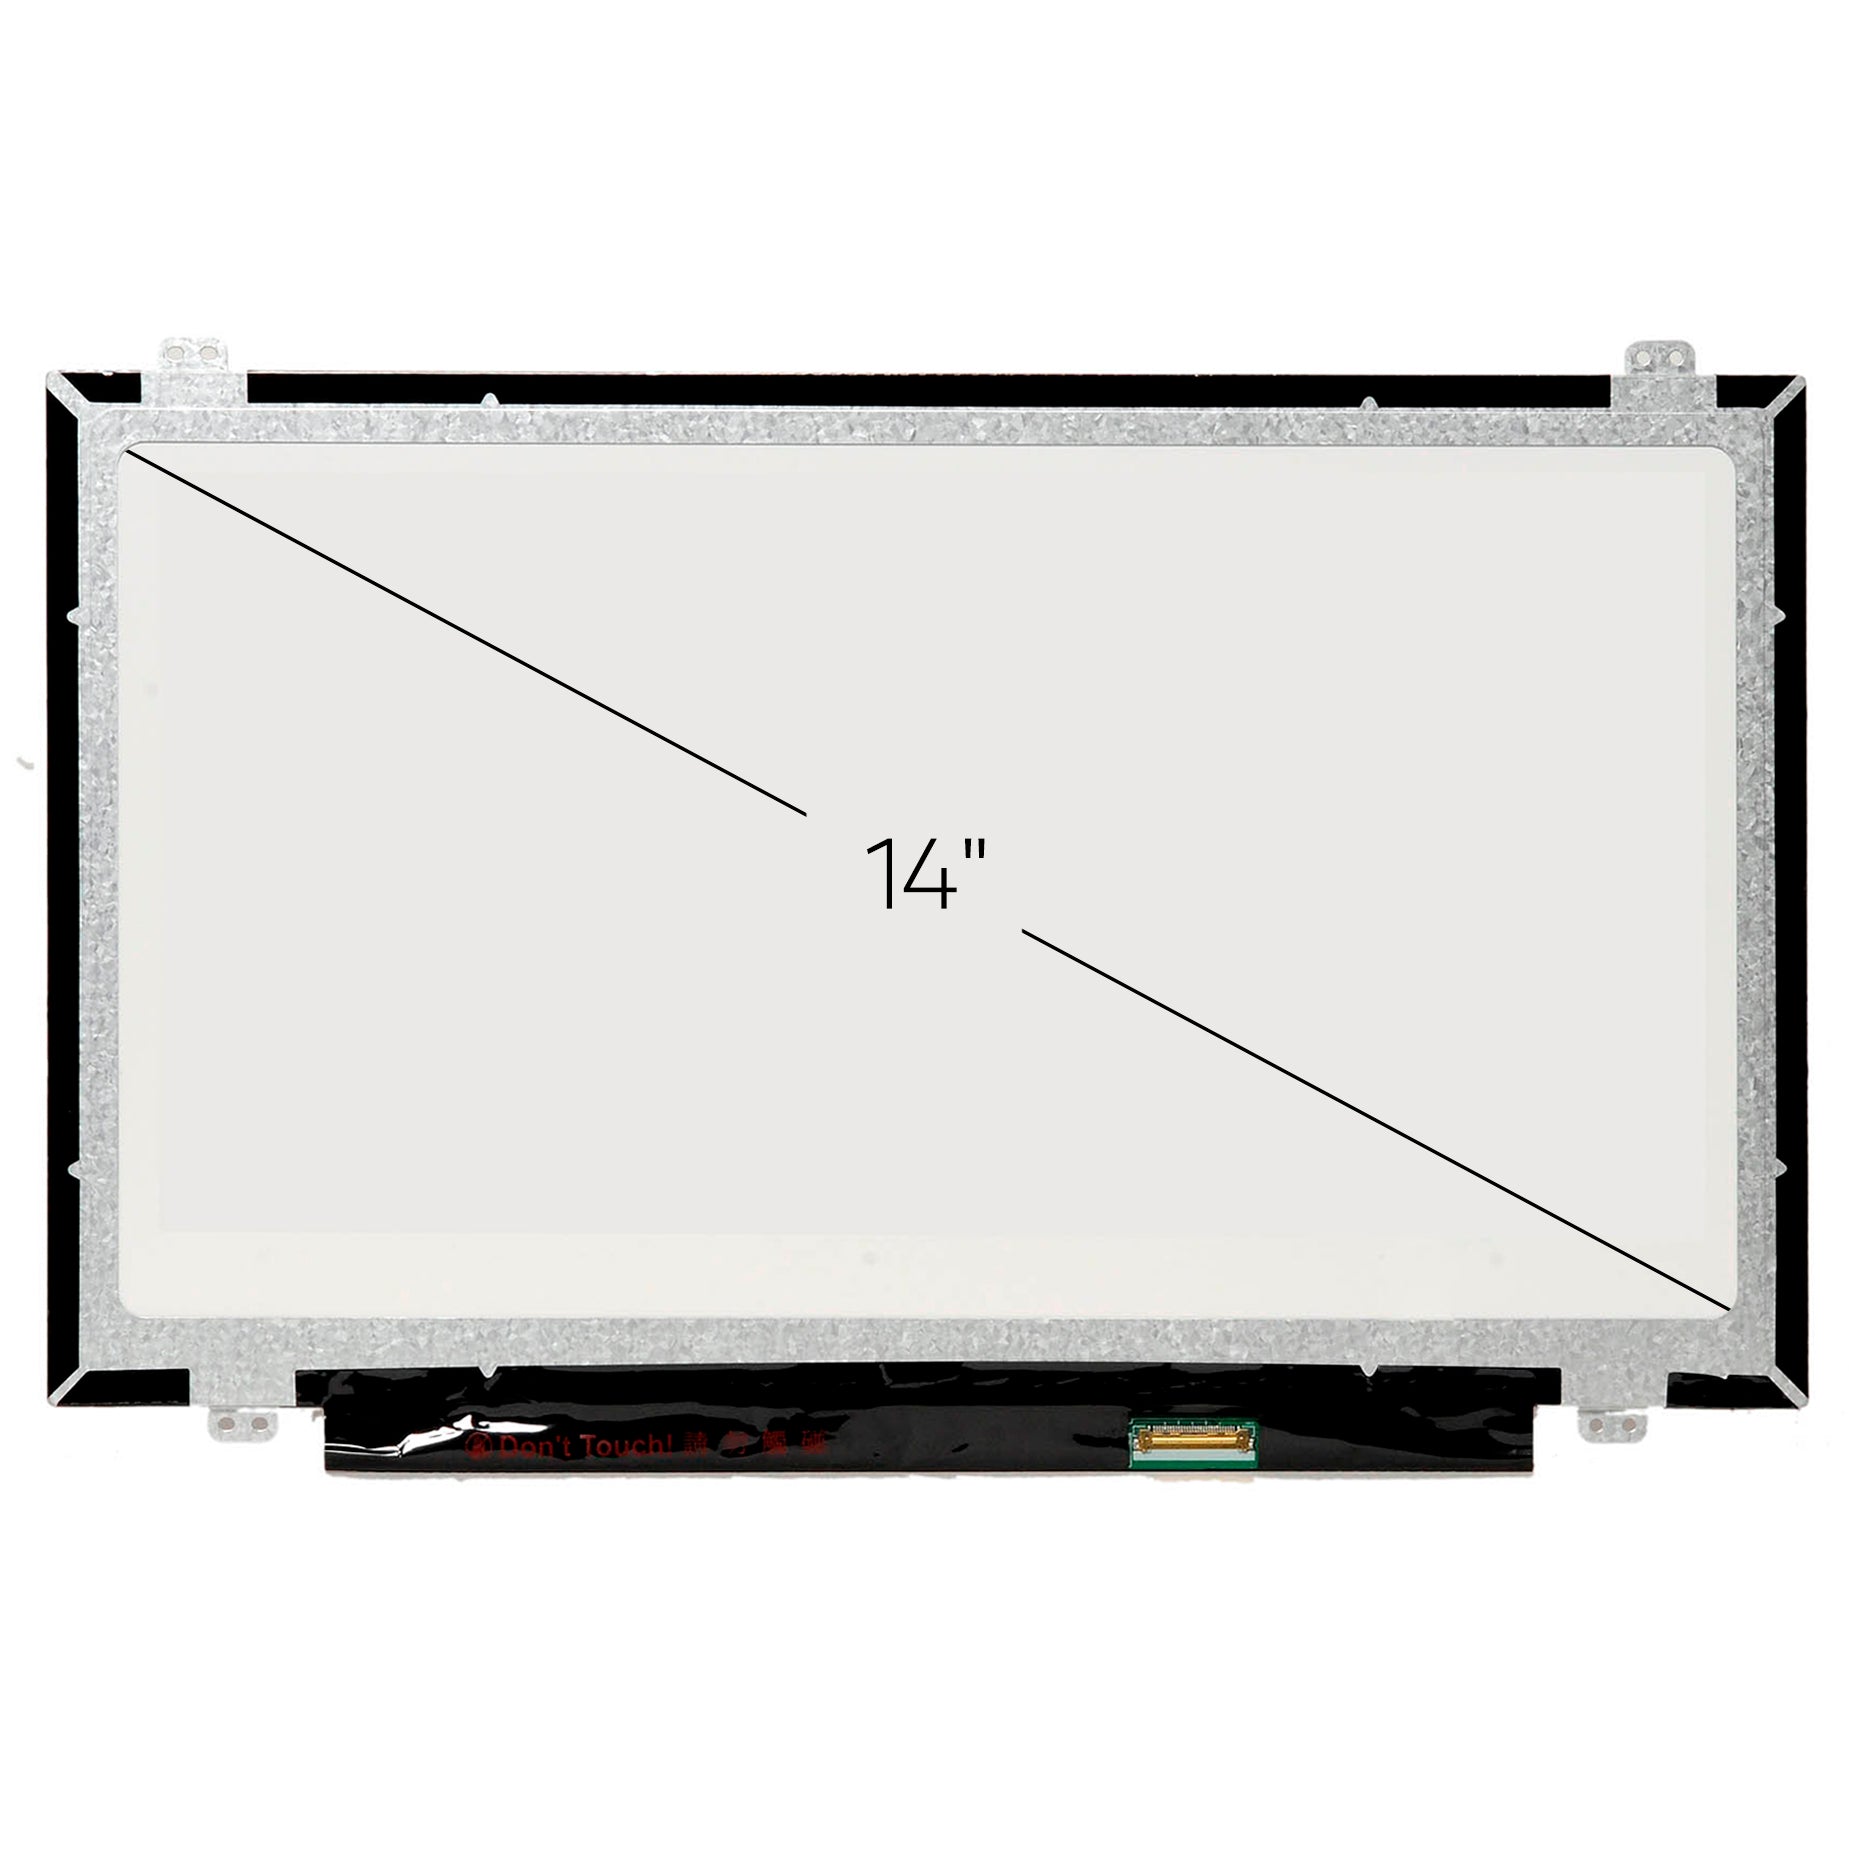 Screen Replacement for Acer Aspire E1-472 HD 1366x768 Glossy LCD LED Display